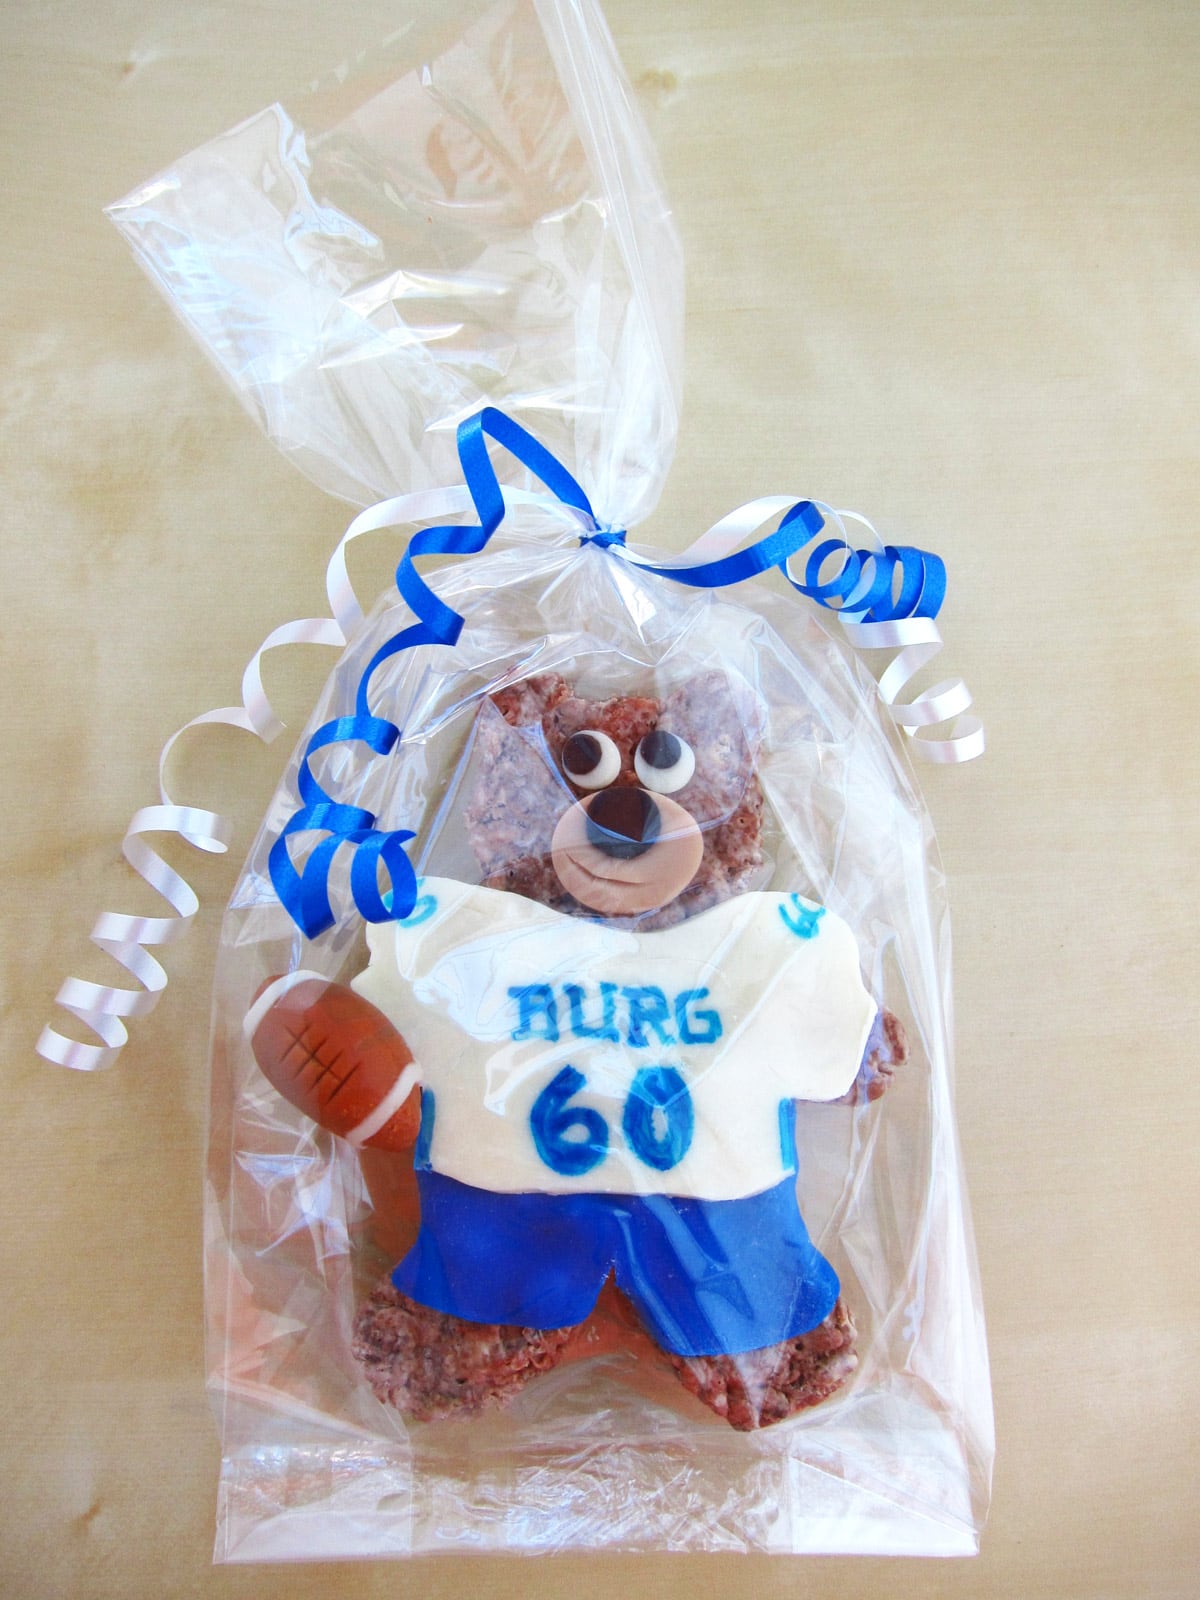 Rice Krispie Treat bear in a blue and white modeling chocolate football uniform.